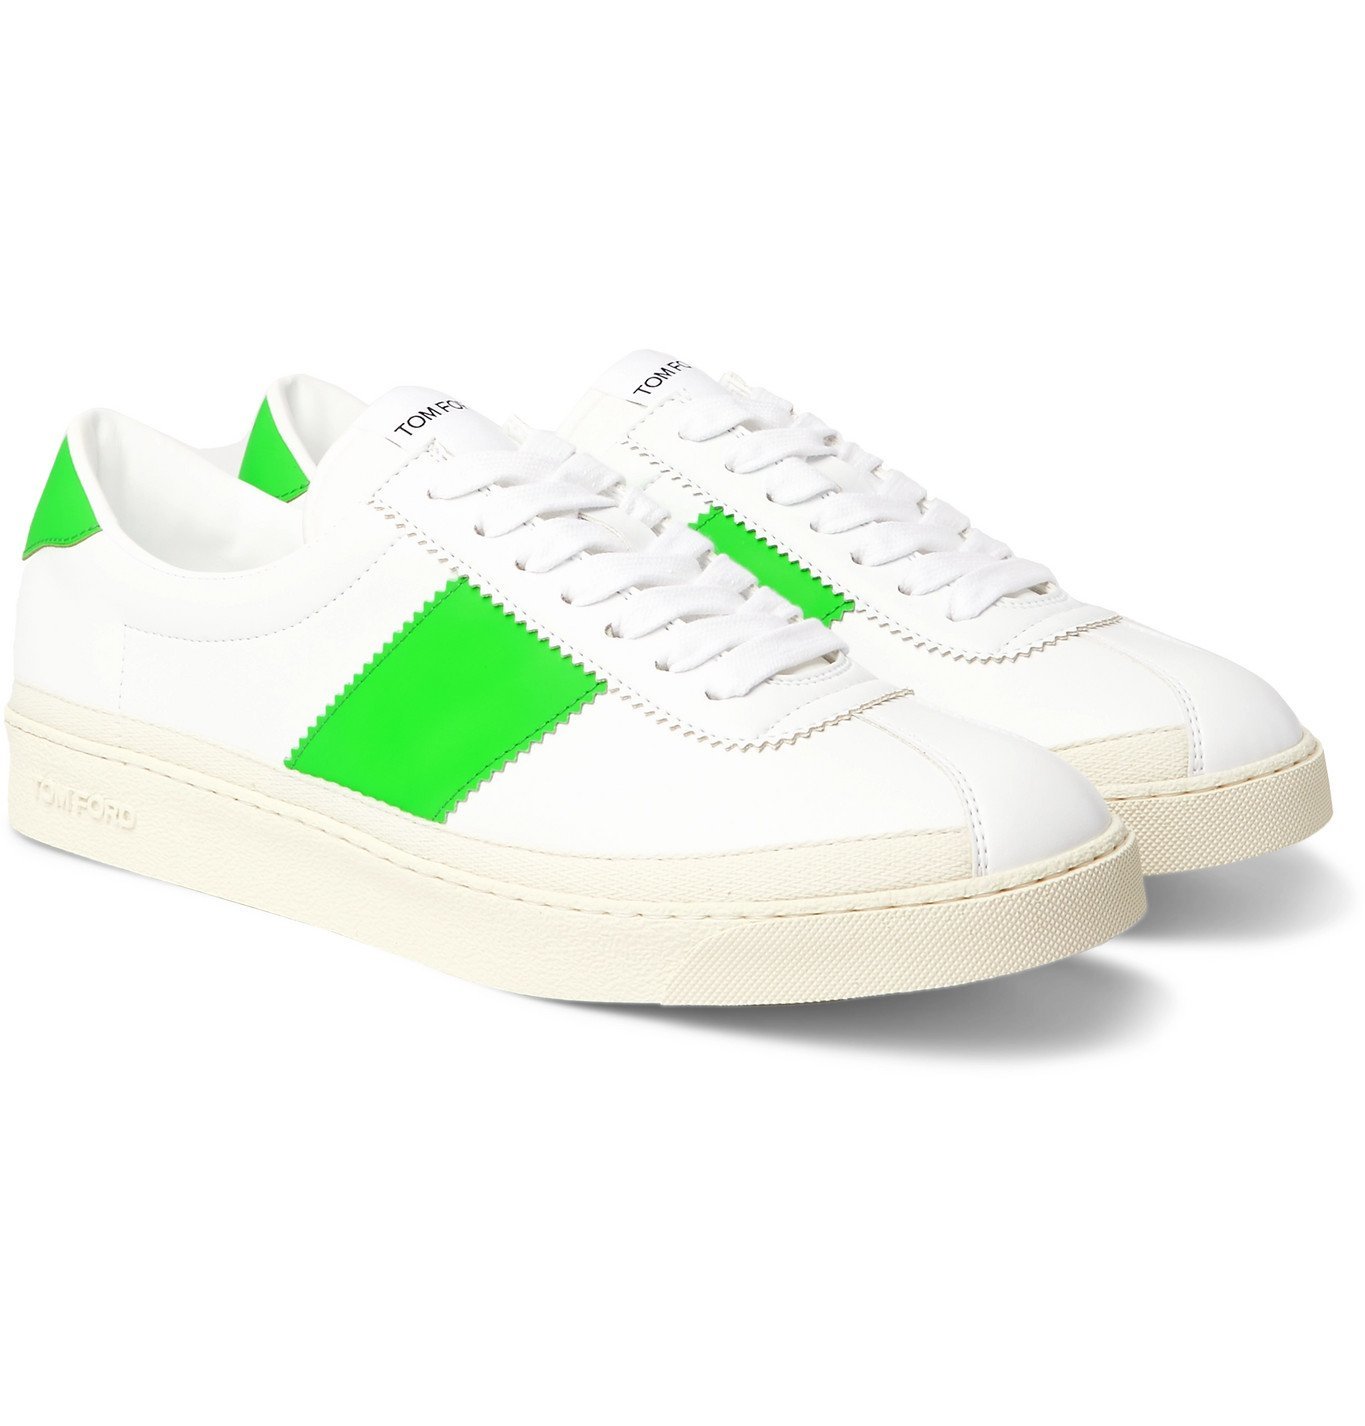 TOM FORD - Bannister Panelled Faux Leather Sneakers - White TOM FORD